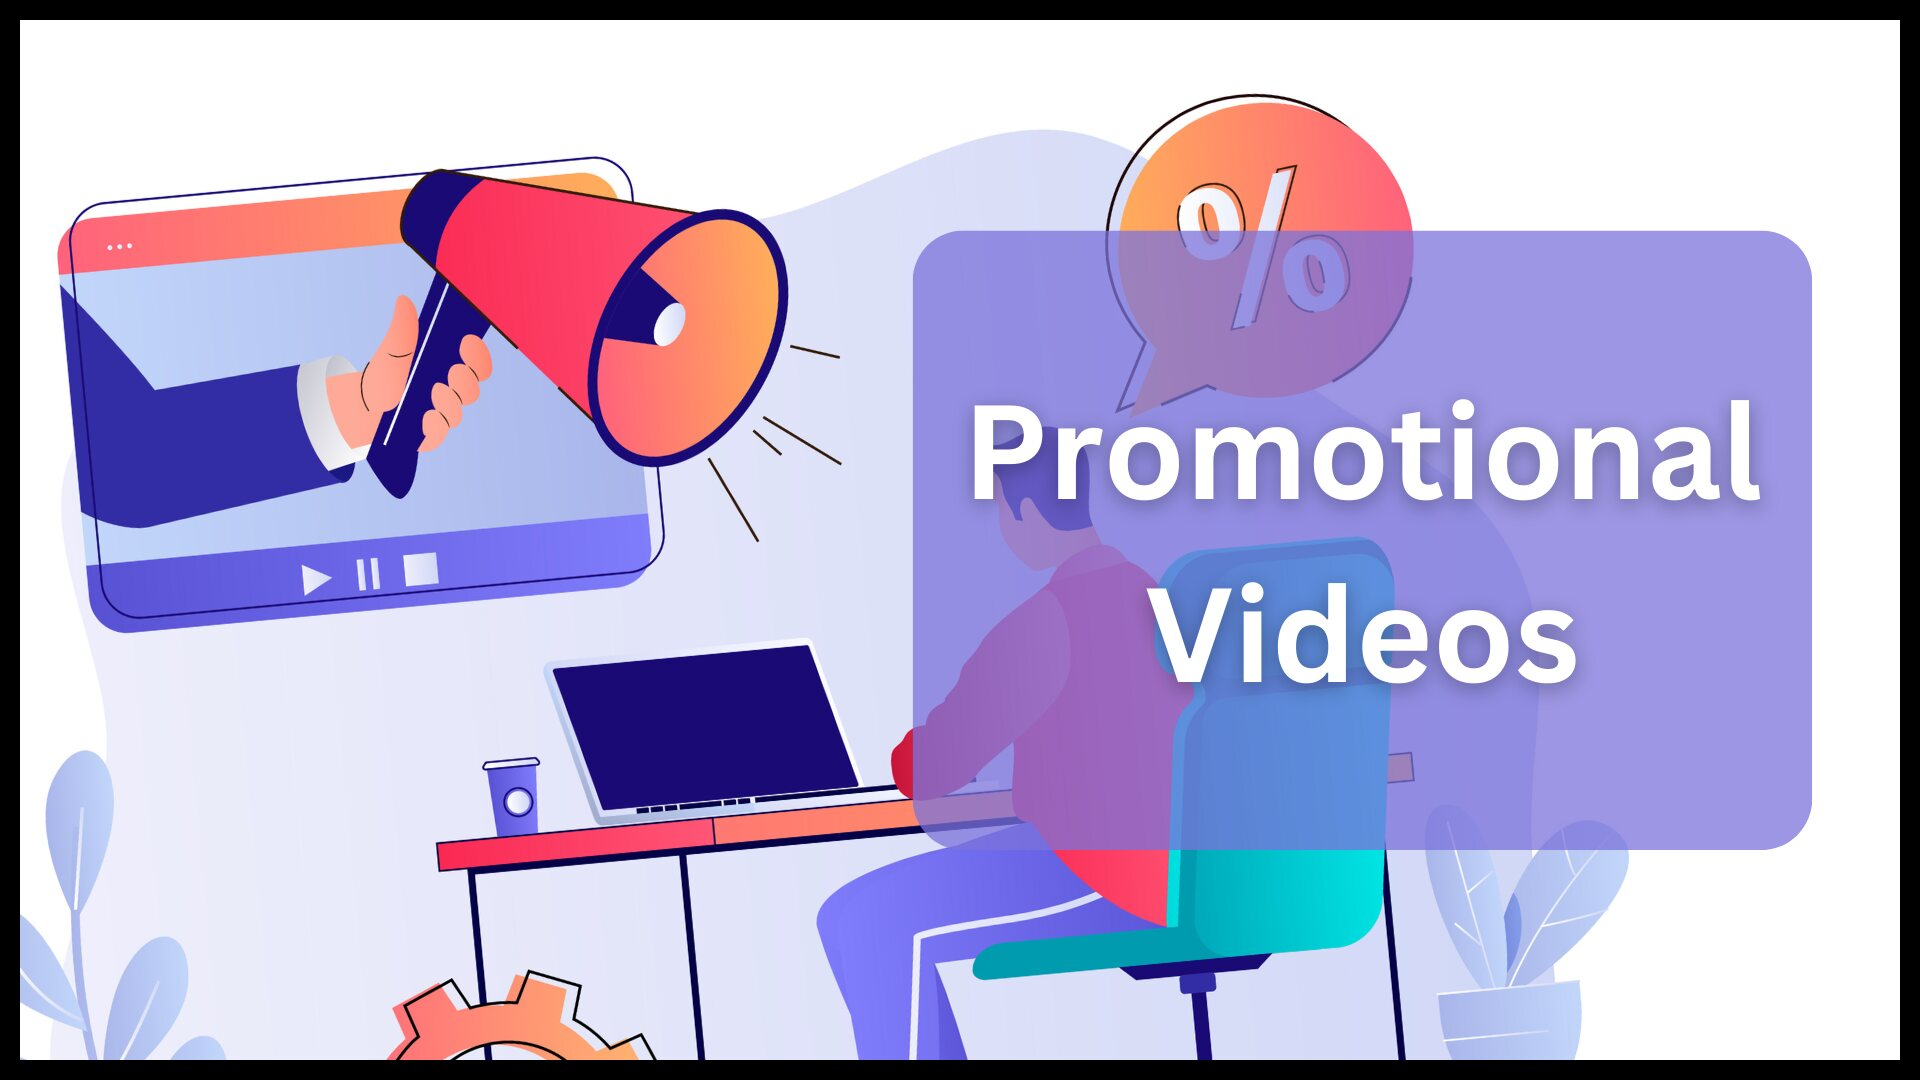 Promotional Videos for Companies